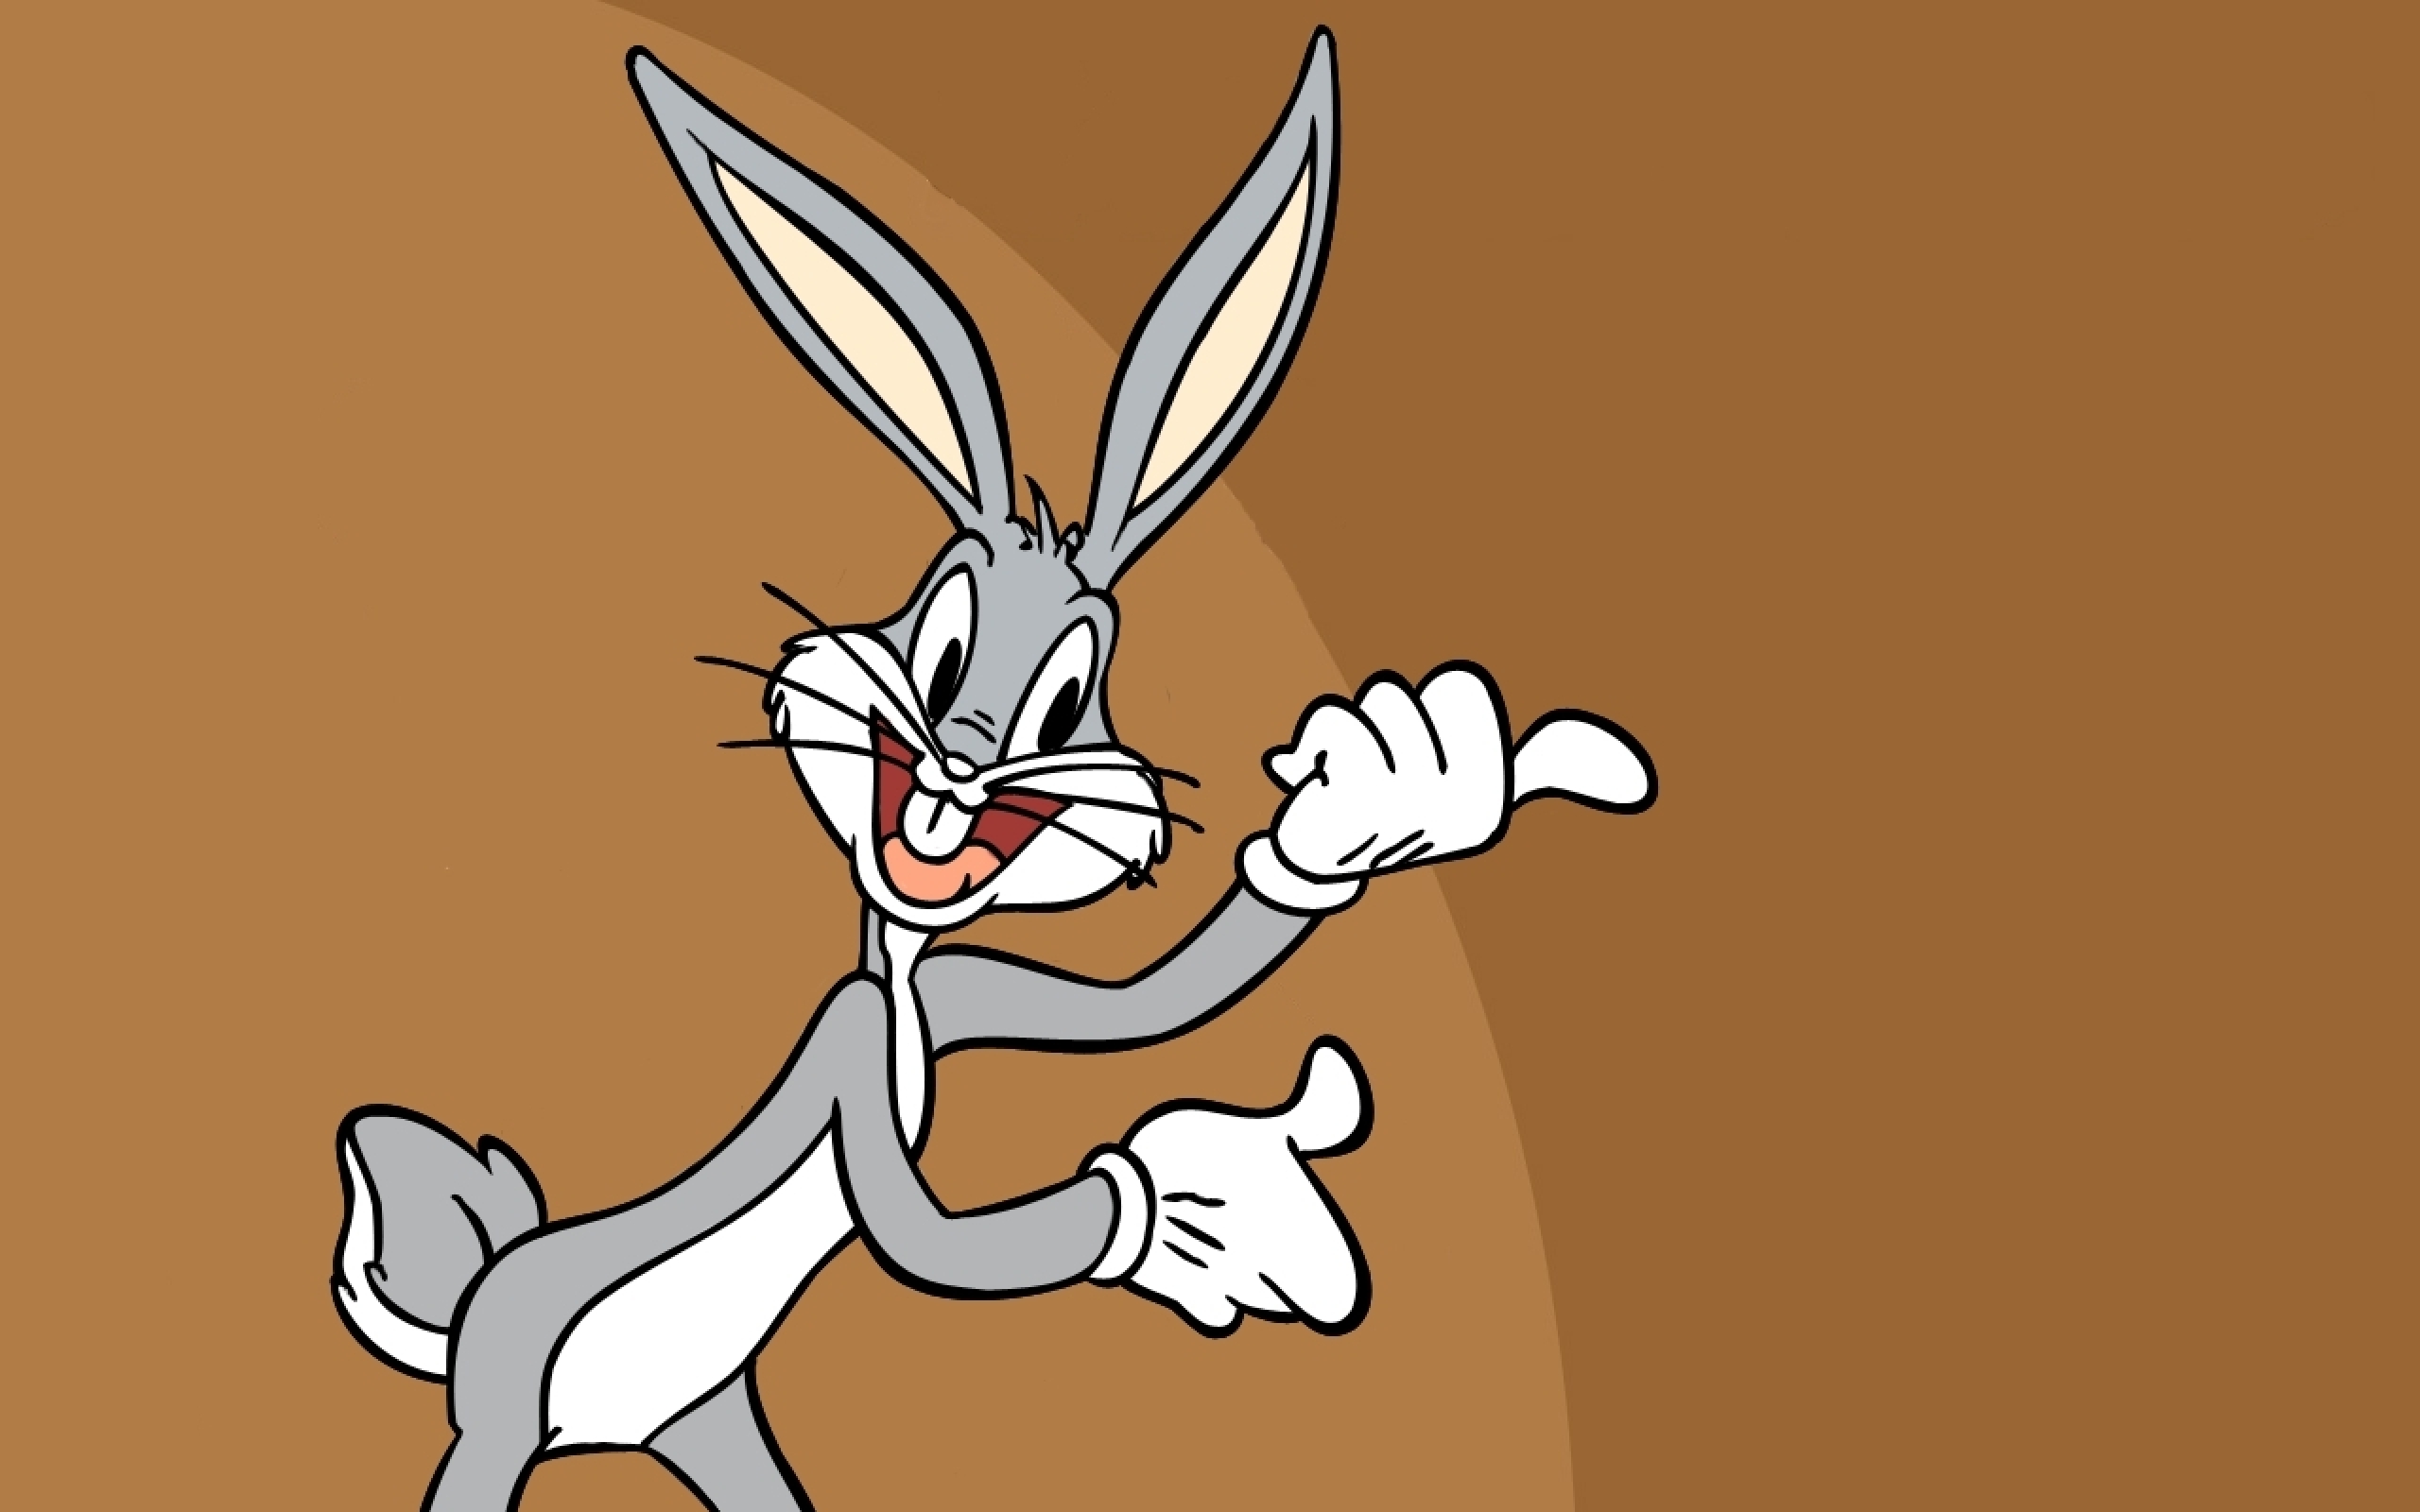 Bugs Bunny Wallpapers   Wallpaper High Definition High Quality